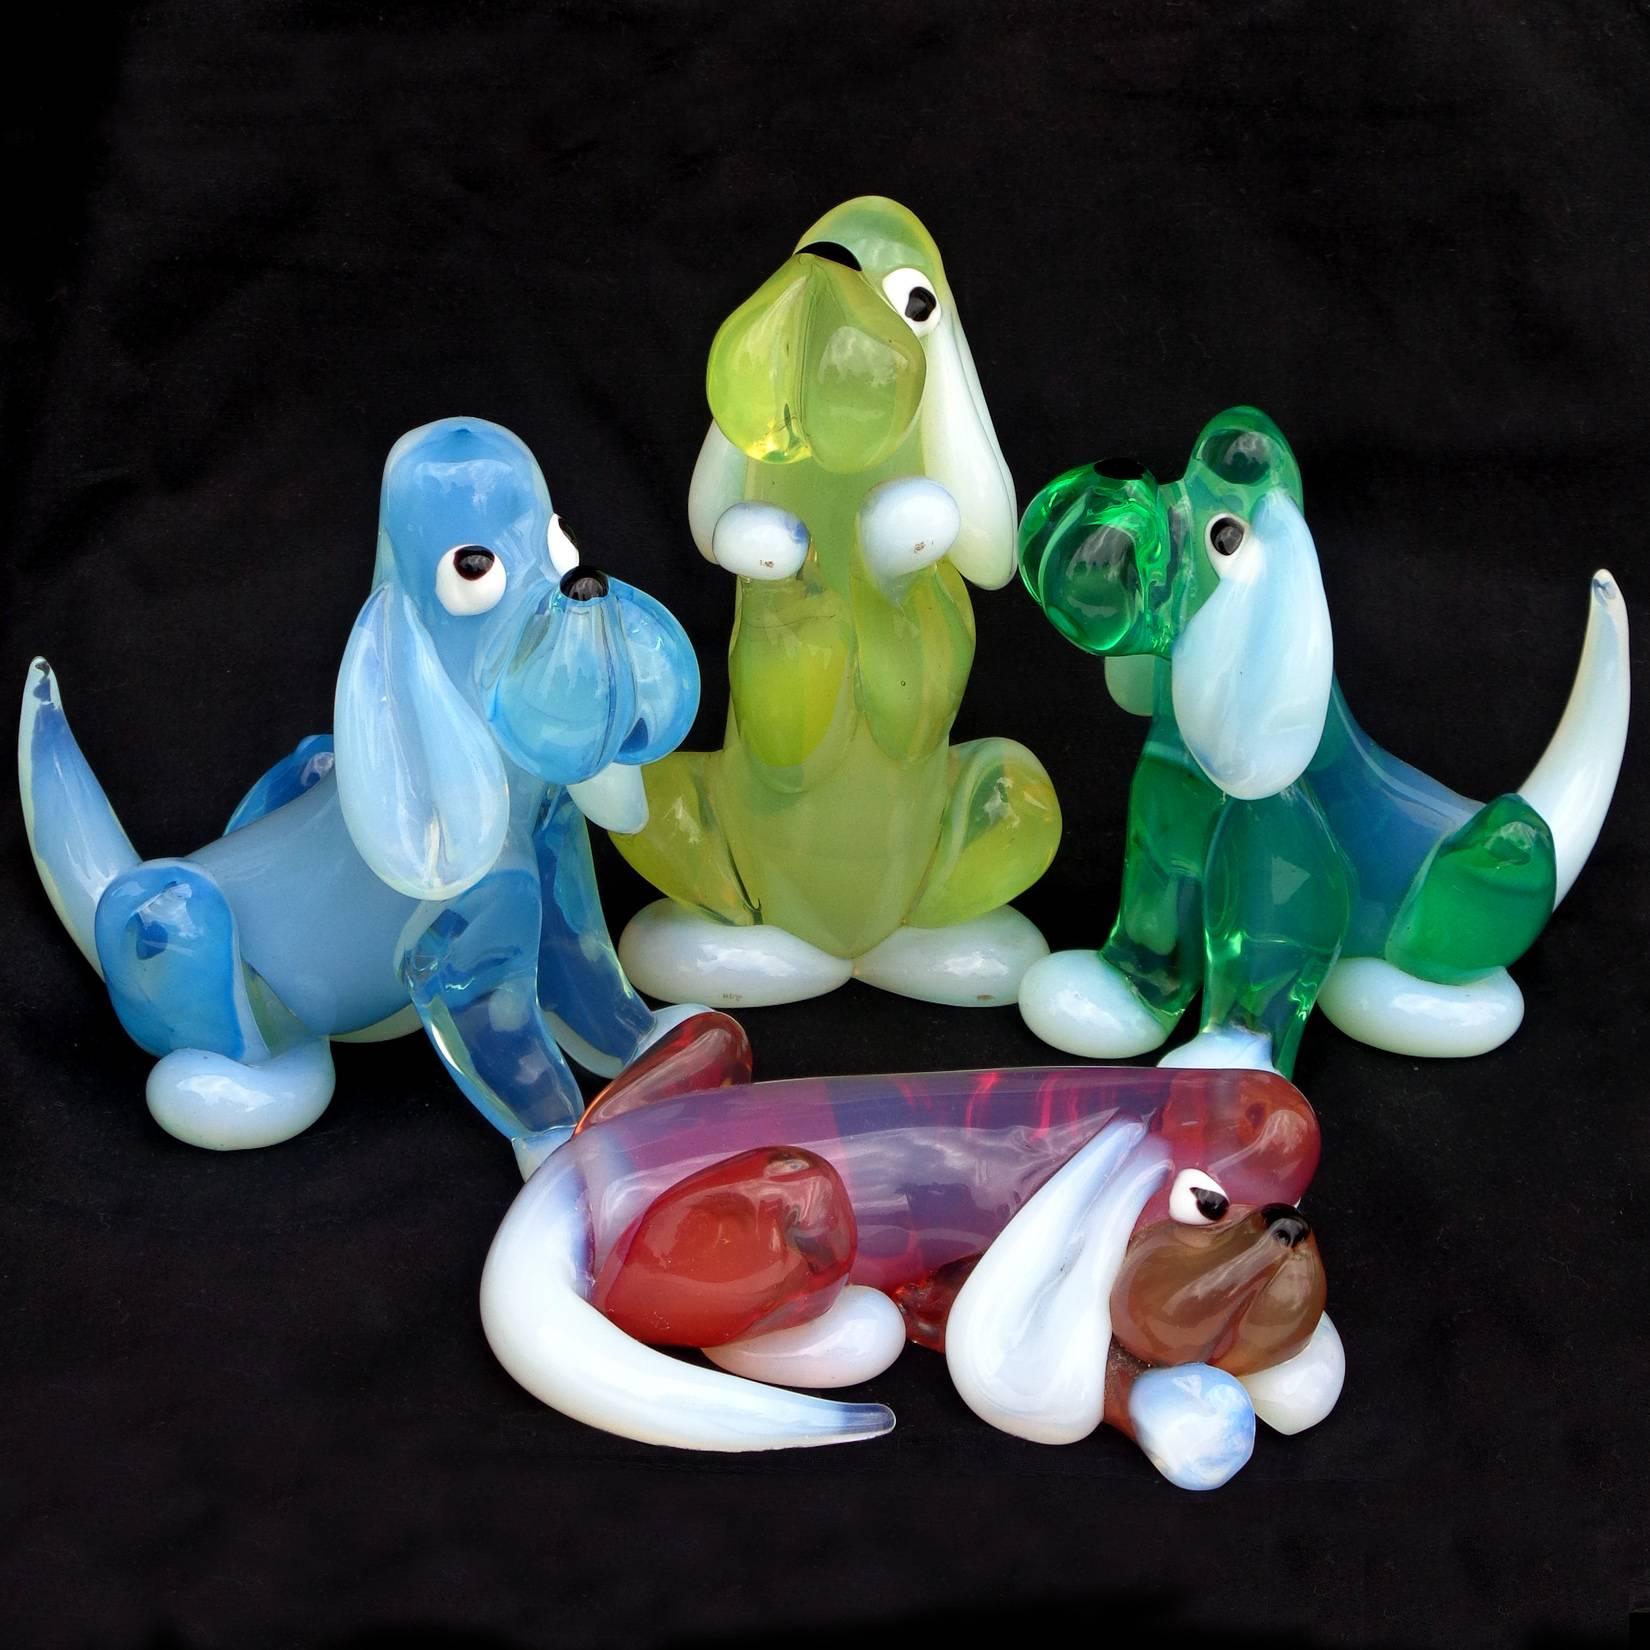 Very rare and cute set of Murano handblown opal pink, yellow, blue and green art glass puppy dog figures. Documented to the Barovier e Toso company, circa 1970s. Last photo shows three different labels on them. Measurements vary, tallest is 5 1/2